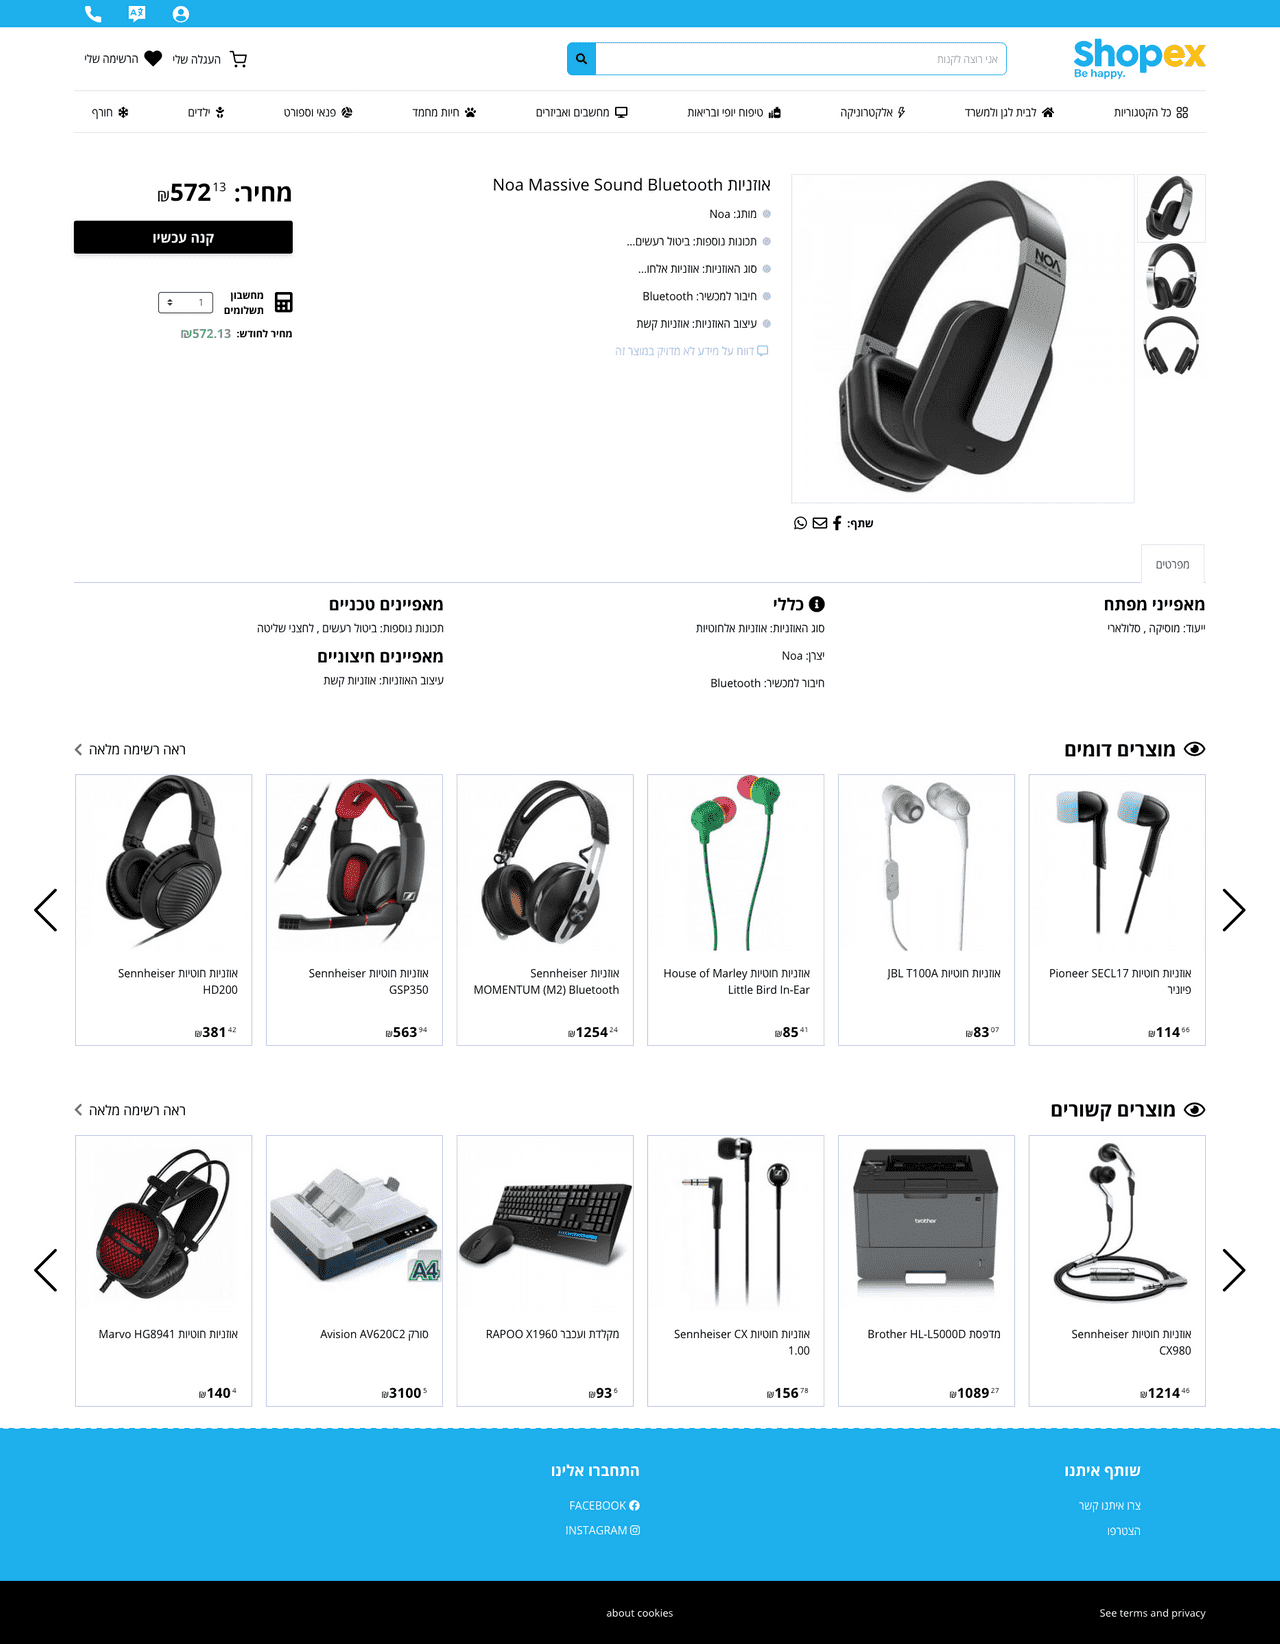 One product page